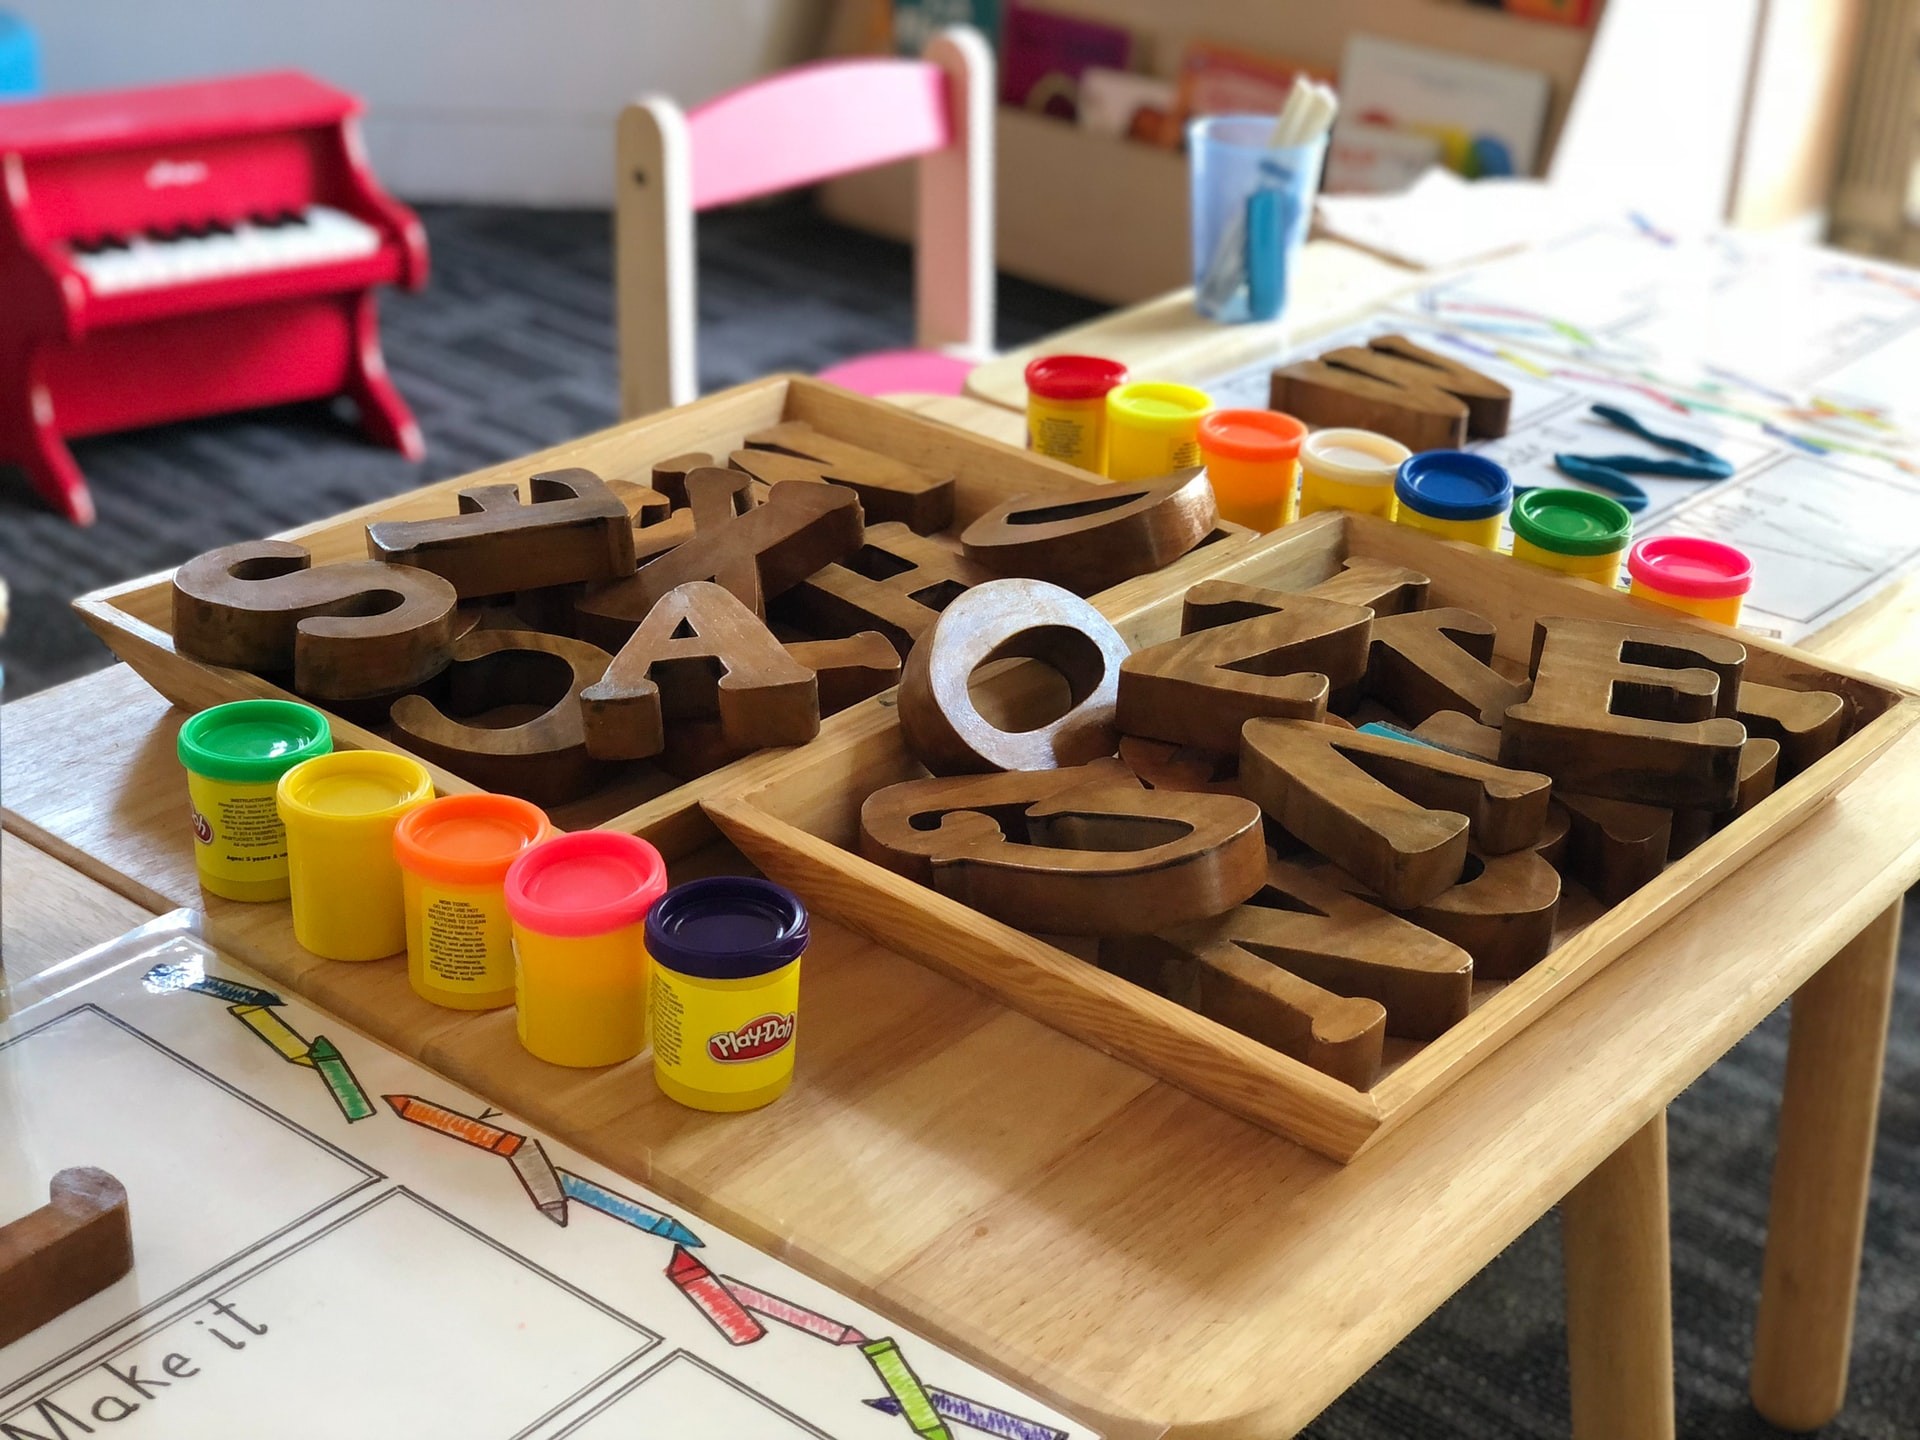 Wooden blocks and play-dough set out as part of a preschool lesson plan